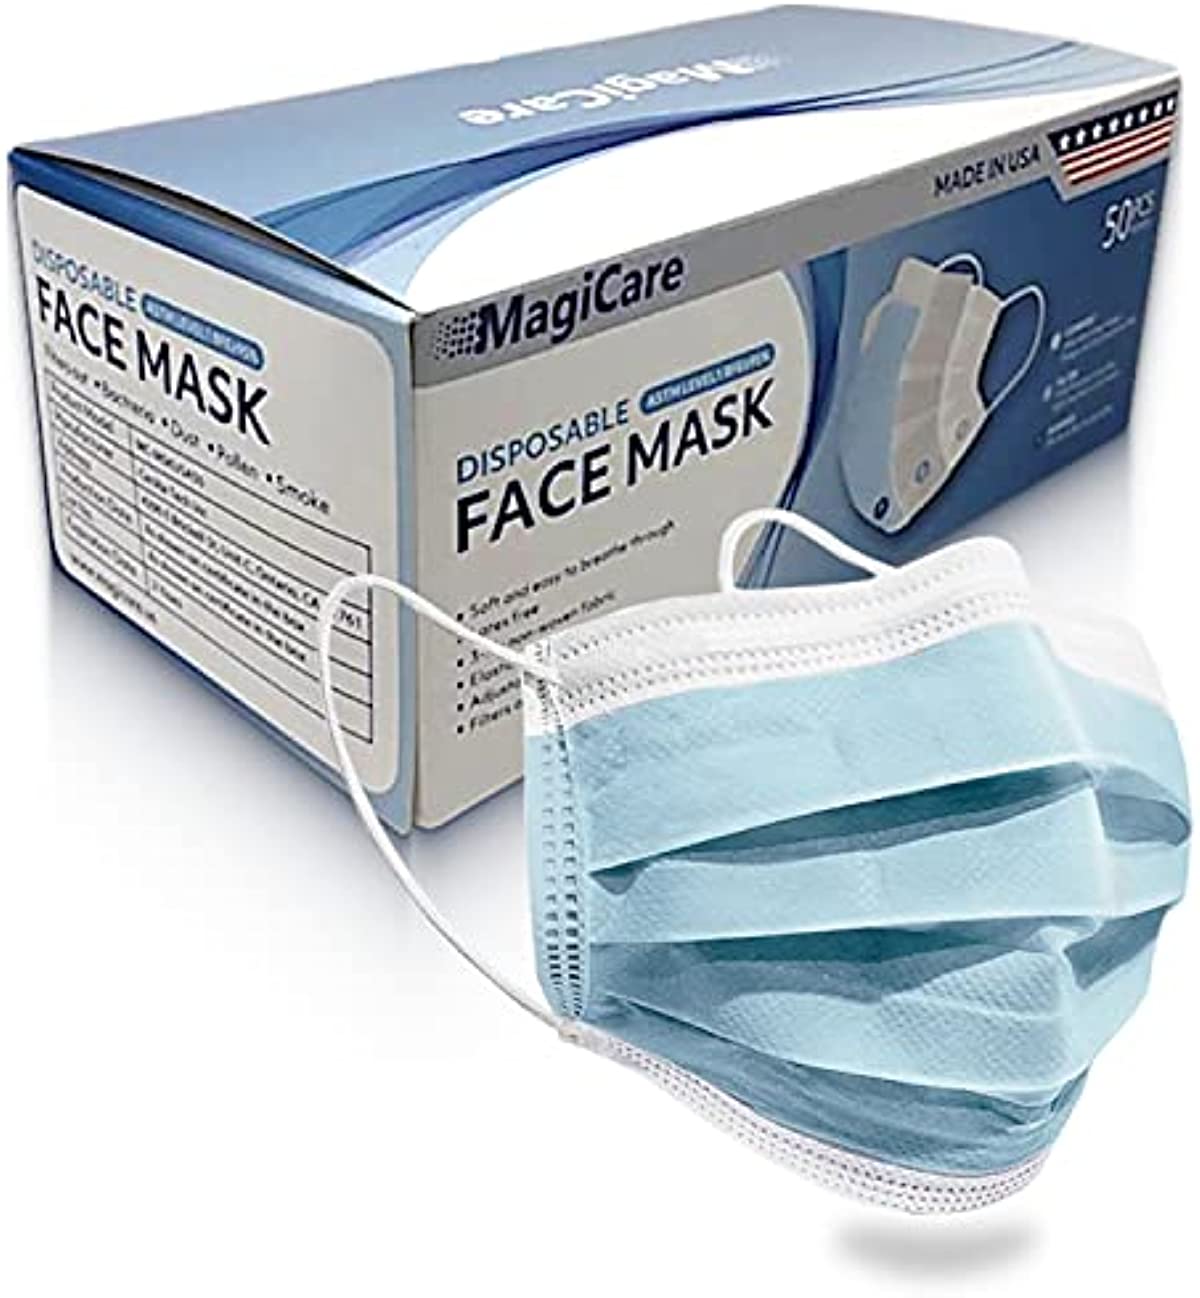 MagiCare Made in USA Masks - Blue Disposable Face Masks - Medical Grade (ASTM Level 1) - Premium 3 Ply Face Masks Disposable Made In USA - Comfortable, Soft, Breathable Face Mask for Adults - Face Mask American Made, 50ct Box